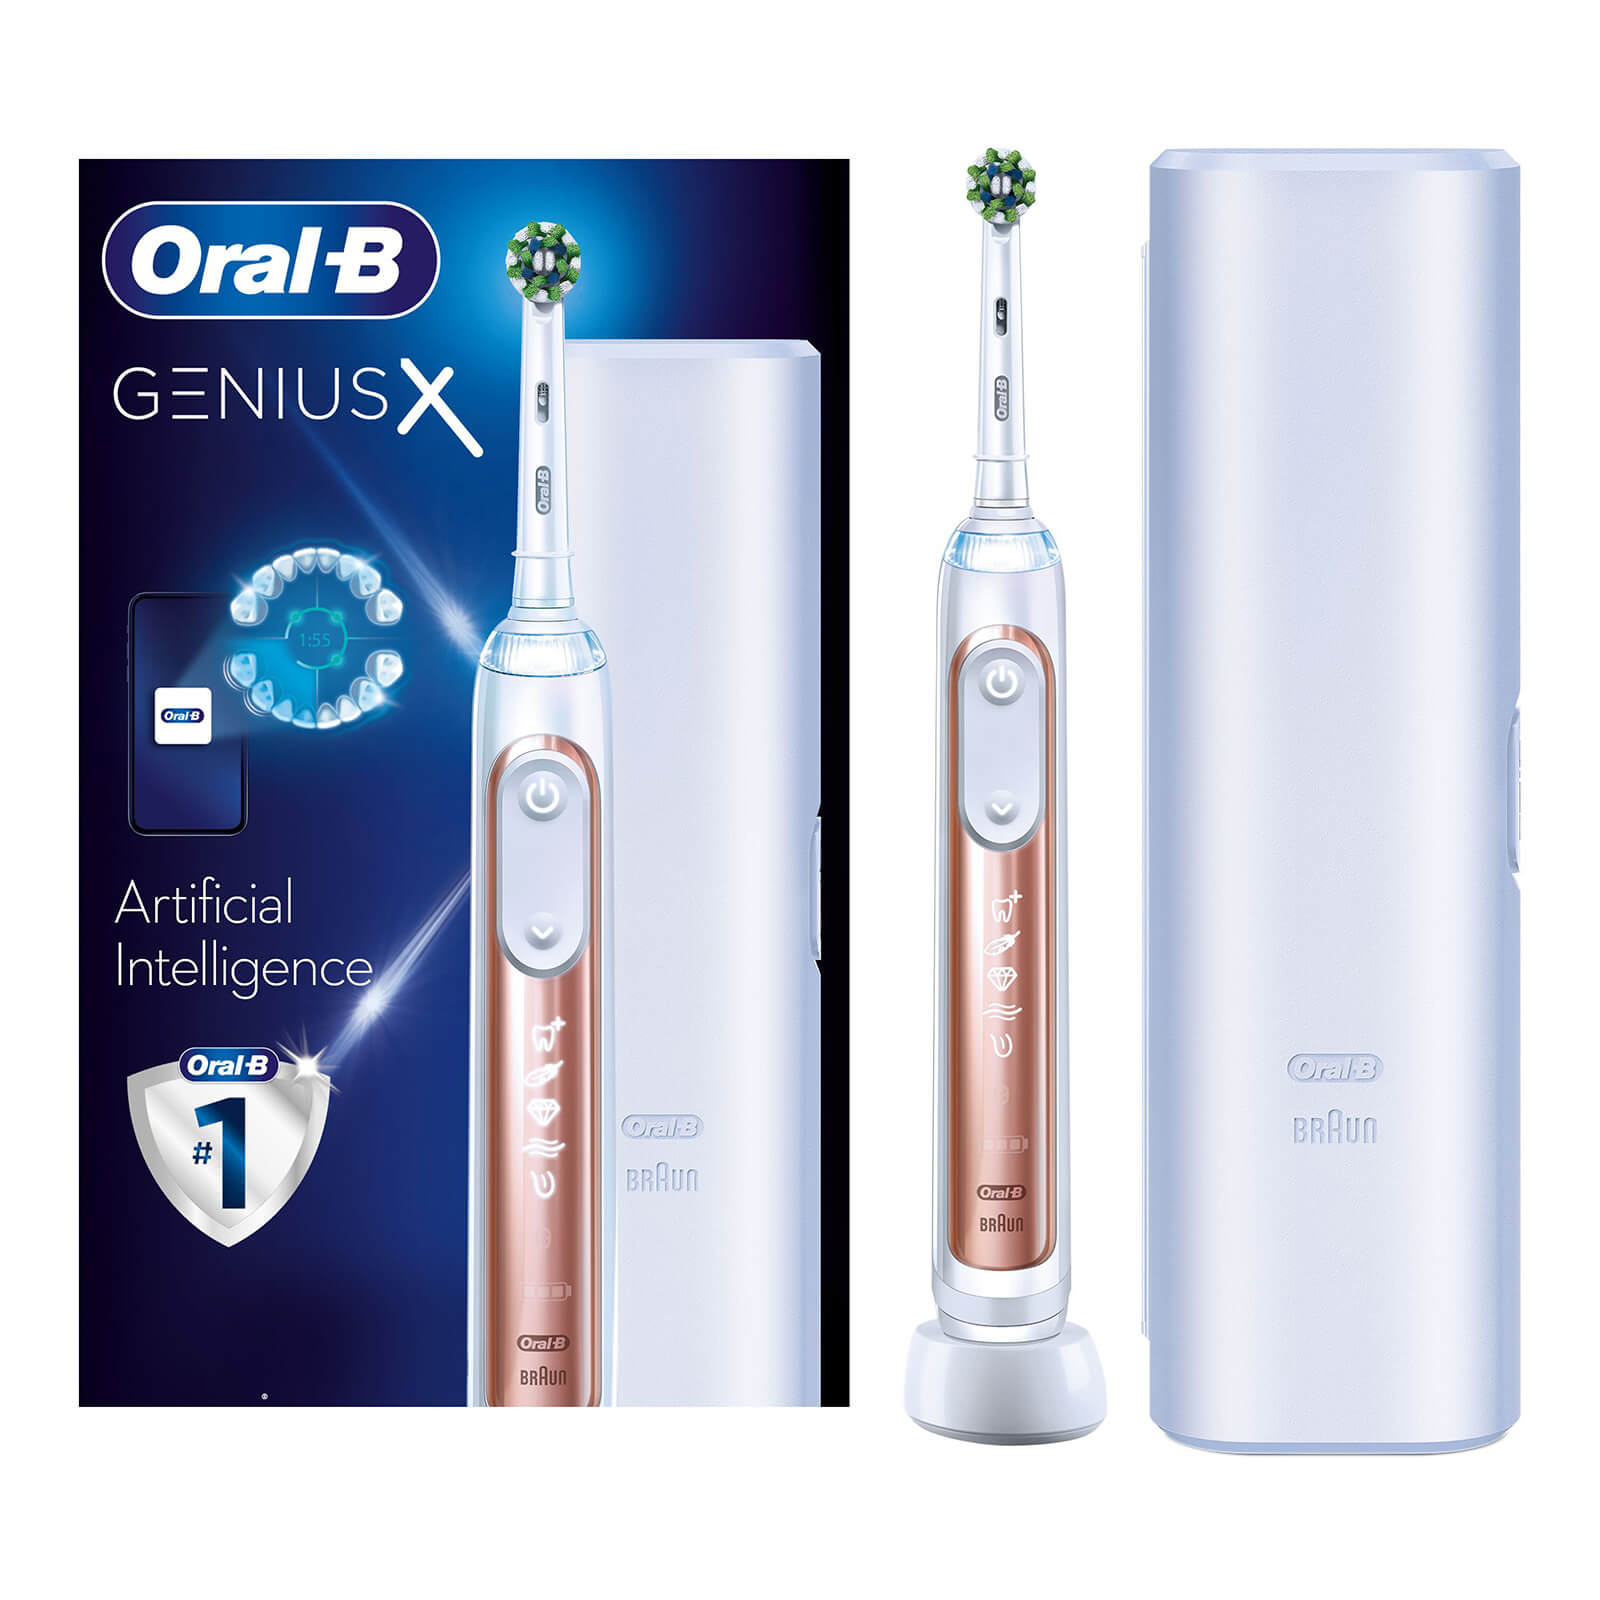 Oral-B Genius X Rose Gold Electric Toothbrush with Travel Case - Toothbrush